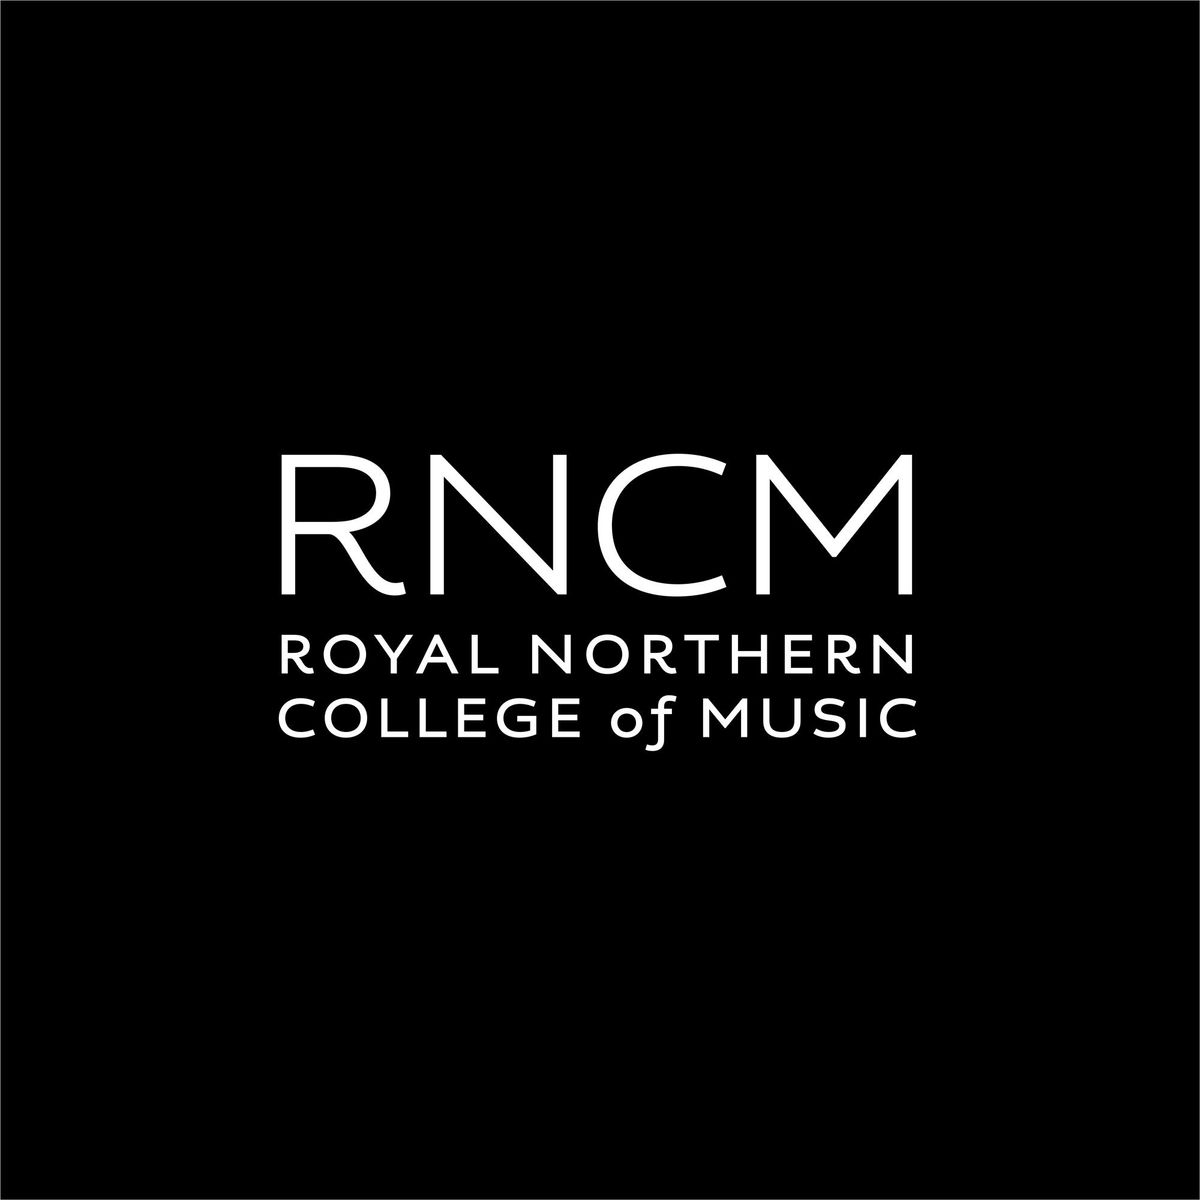 The Silent Planet at Royal Northern College of Music